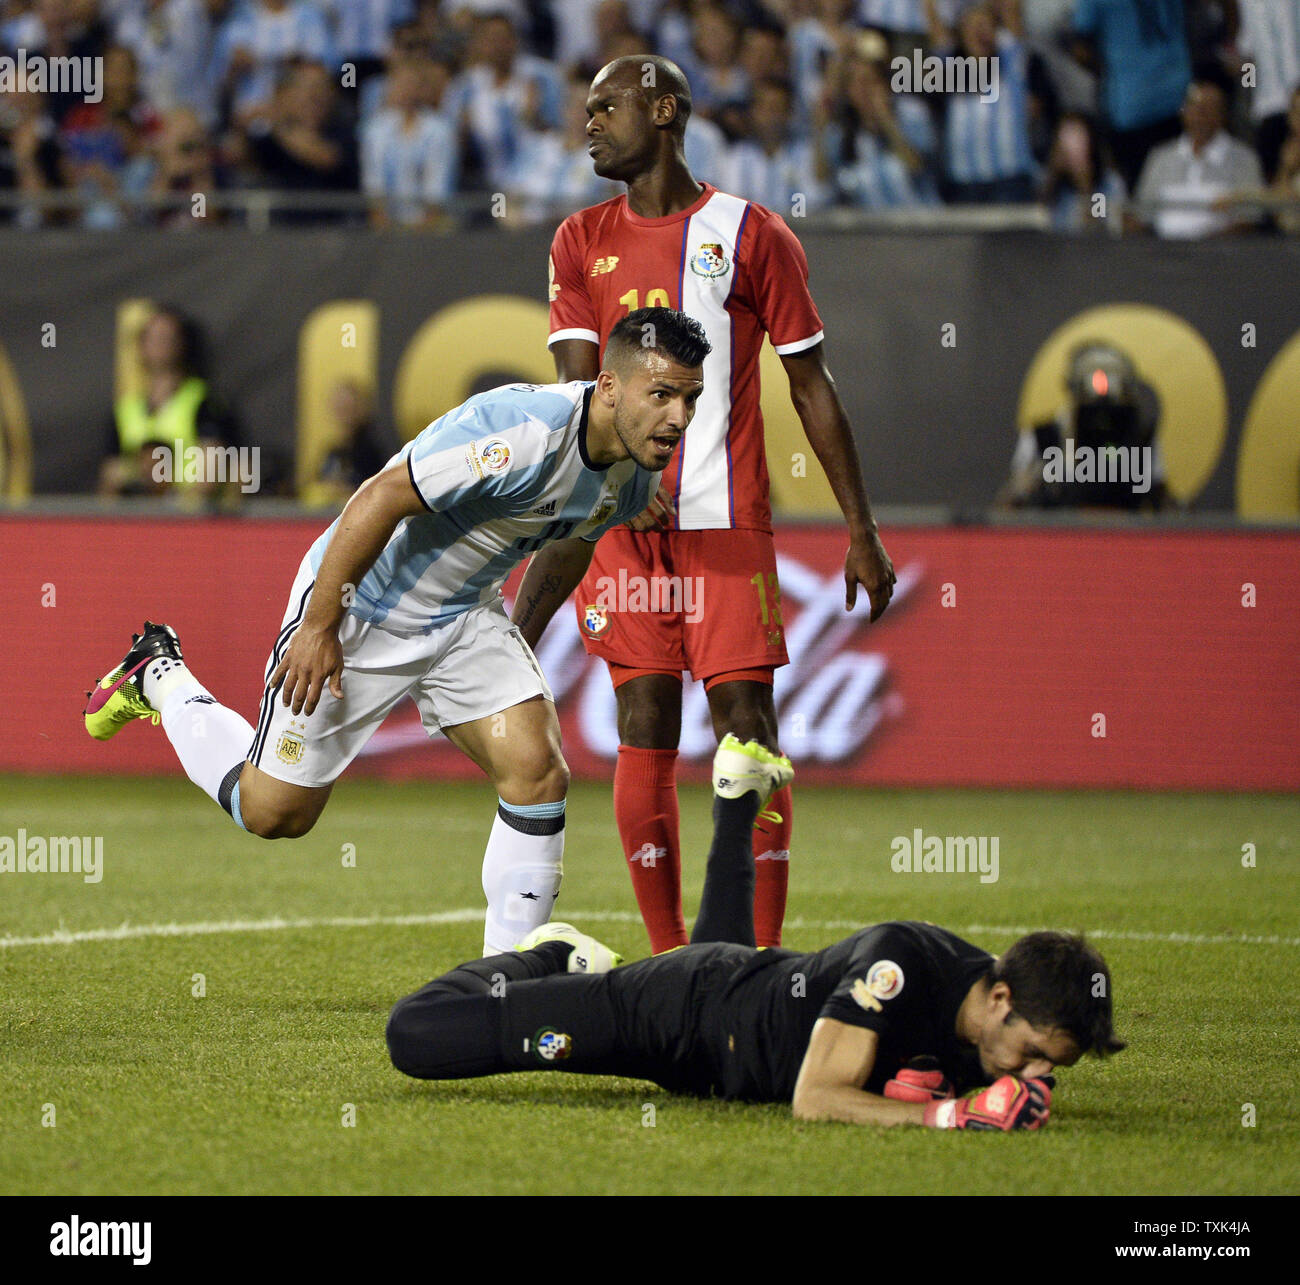 Argentina forward Sergio Aguero (L) reacts after scoring on a header past Panama goalkeeper Jaime Penedo (R) and defender Adolfo Machado  during the second half of a 2016 Copa America Centenario Group D match at Soldier Field in Chicago on June 10, 2016. Argentina defeated Panama 5-0.     Photo by Brian Kersey/UPI Stock Photo